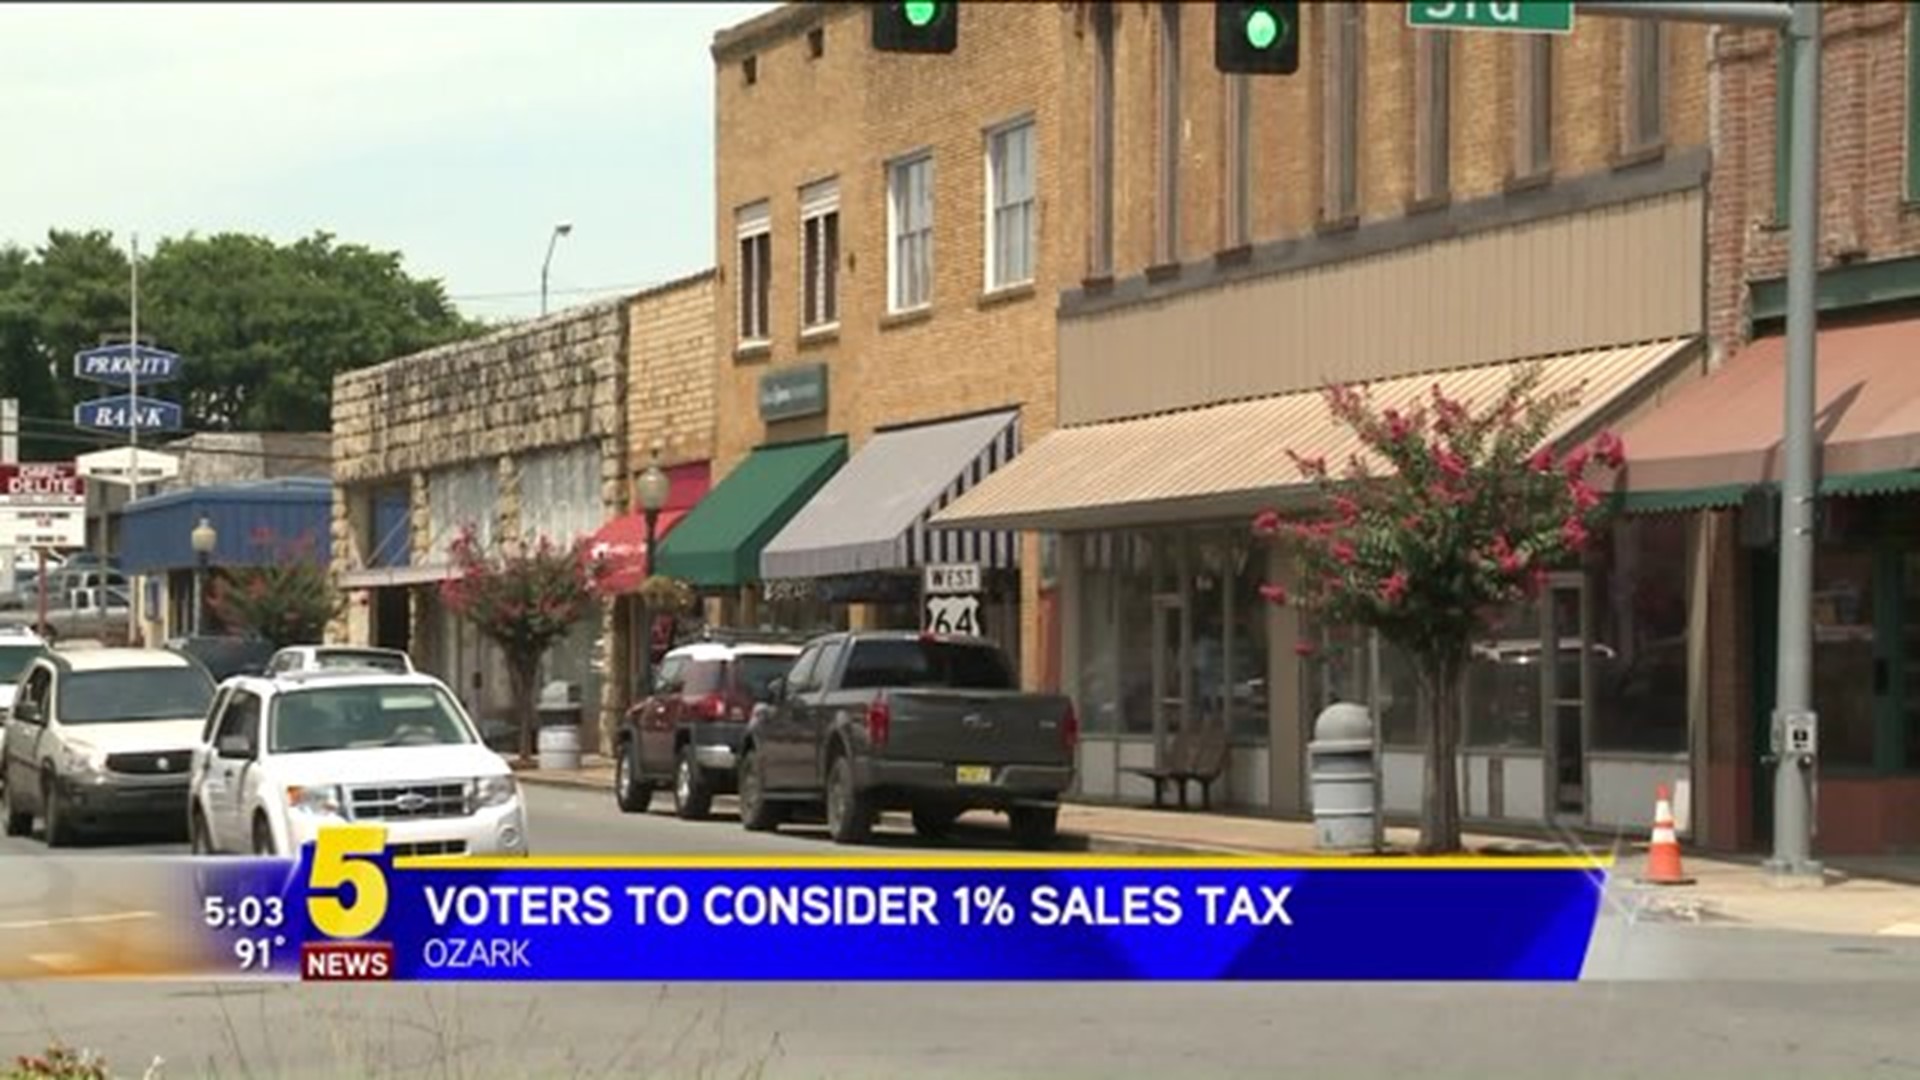 Voters To Consider 1% Sales Tax